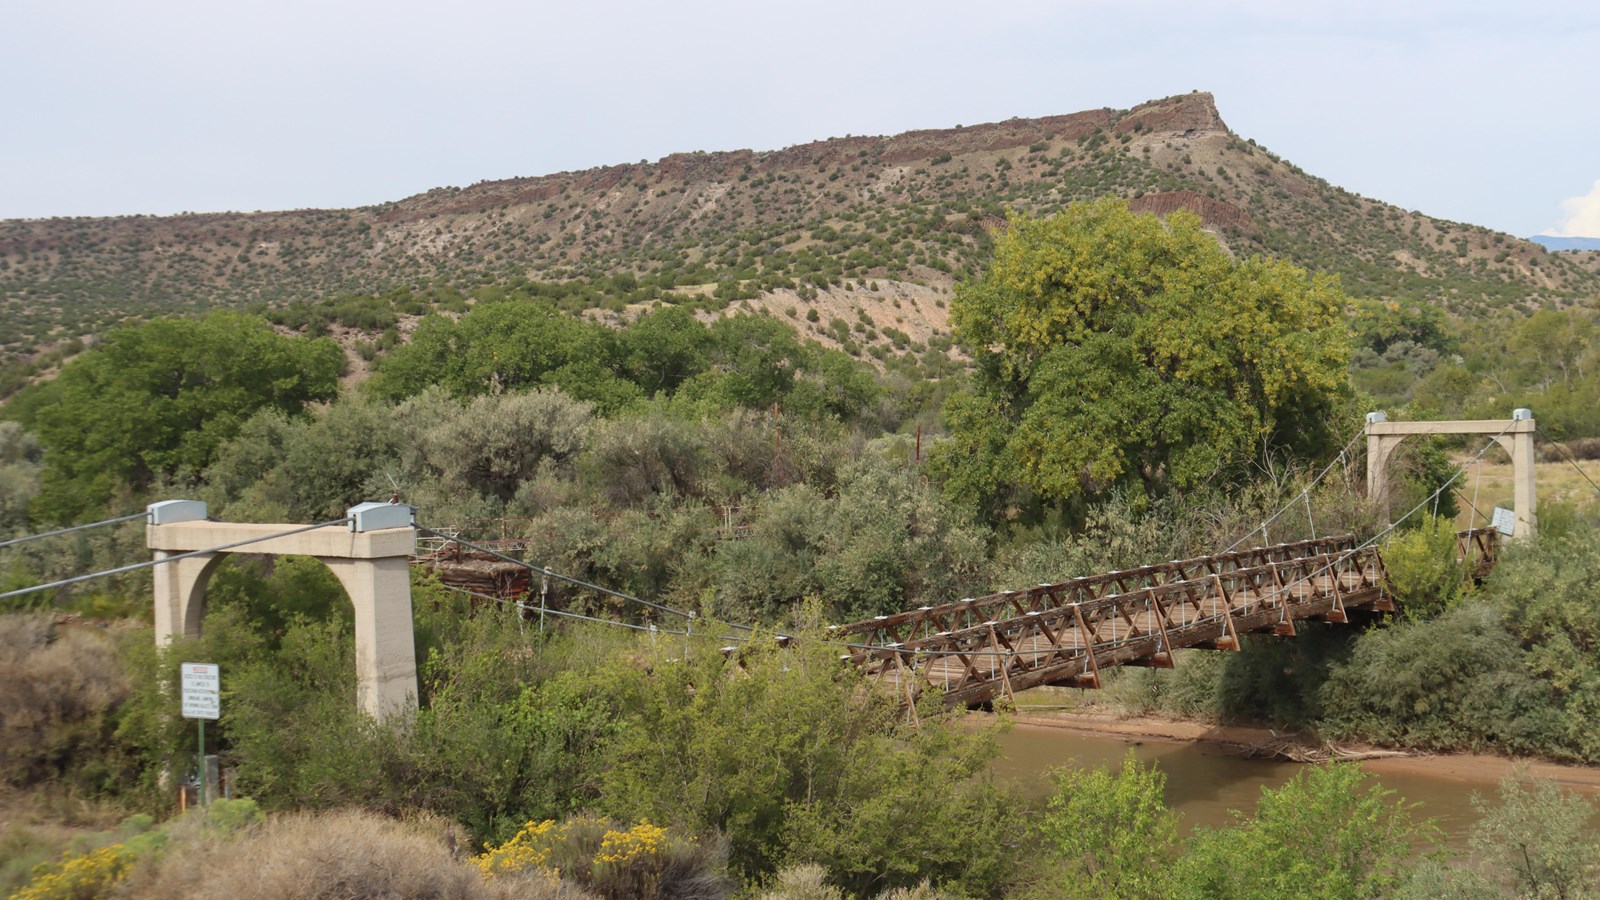 An old, rustic wooden bridge spans a muddy dirty river with a mesa visible in the background. 